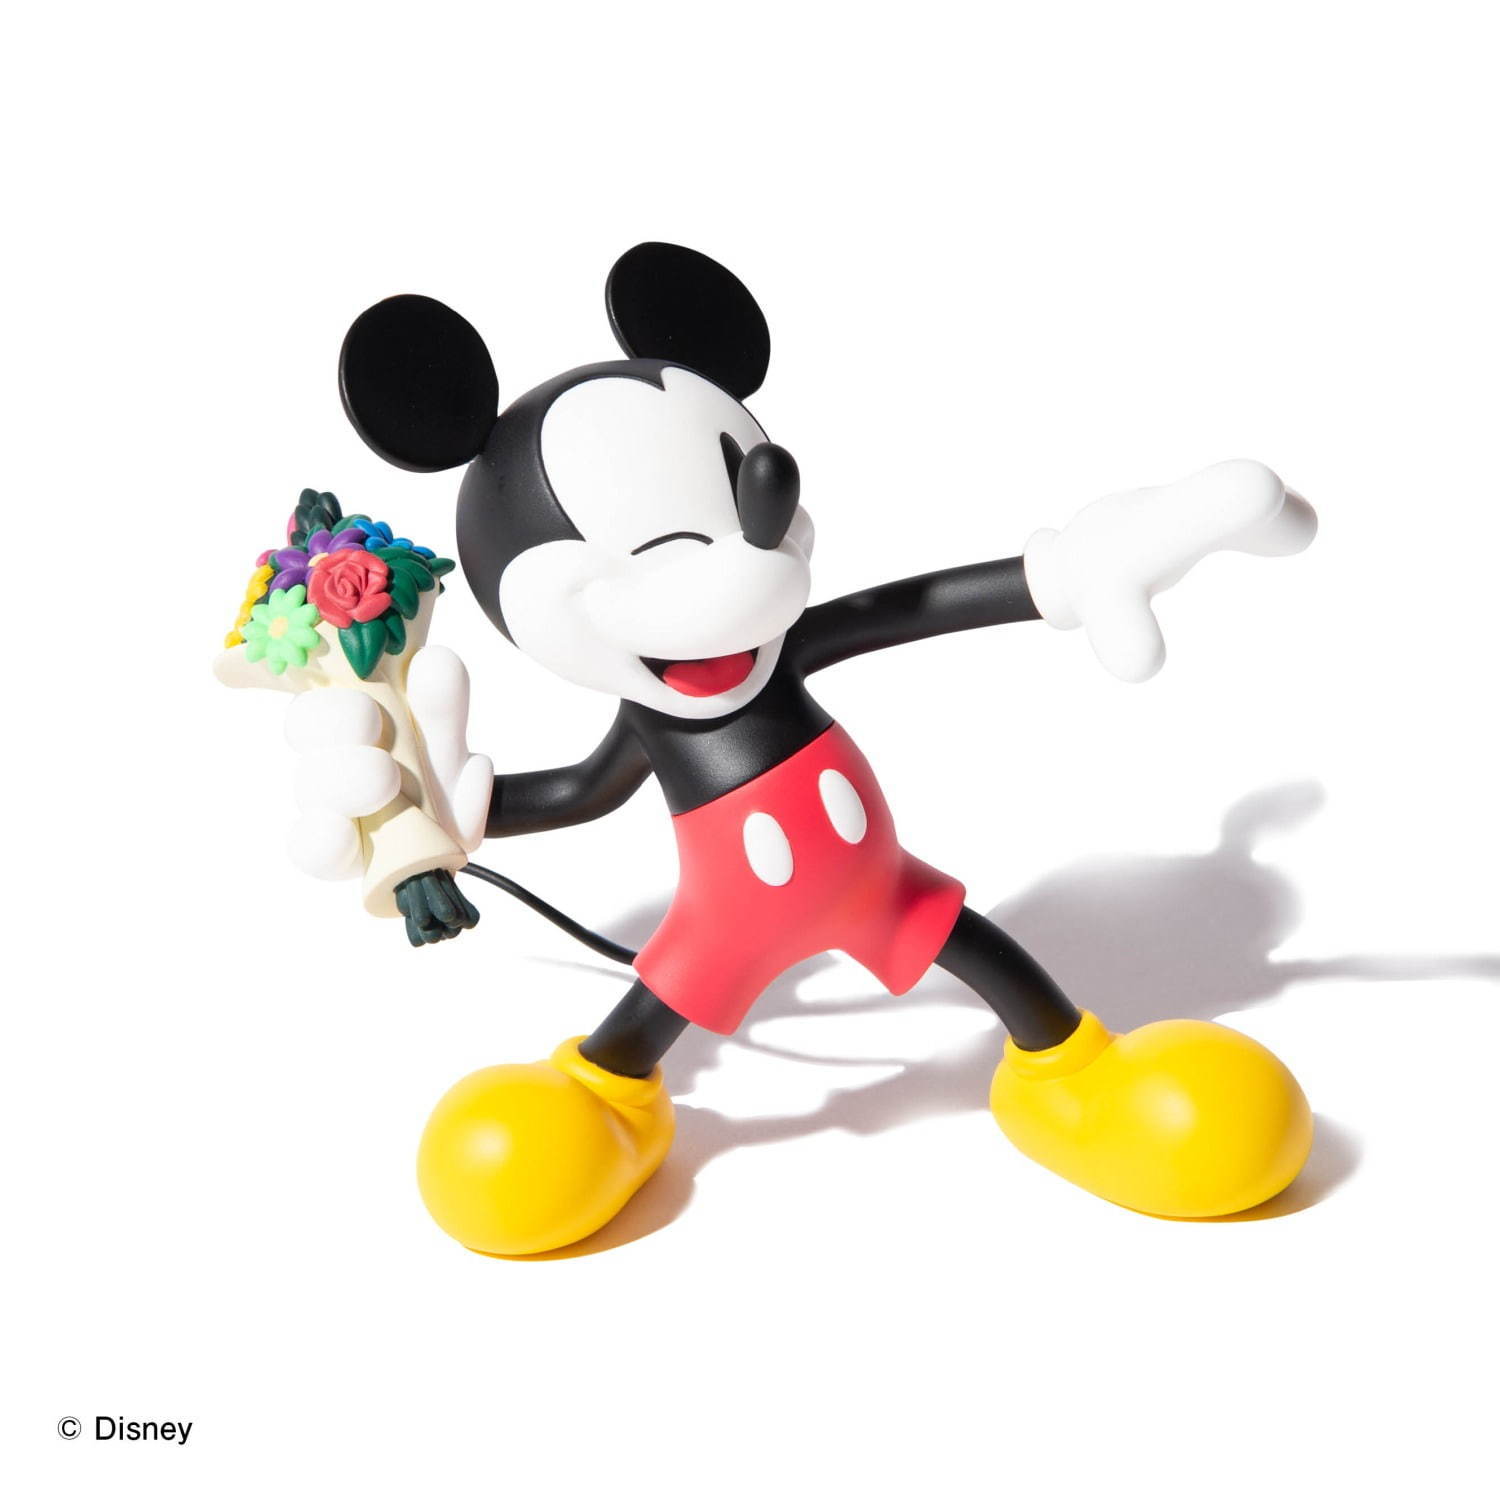 「VCD THROW MICKEY NORMAL Ver.」8,580円(税込)